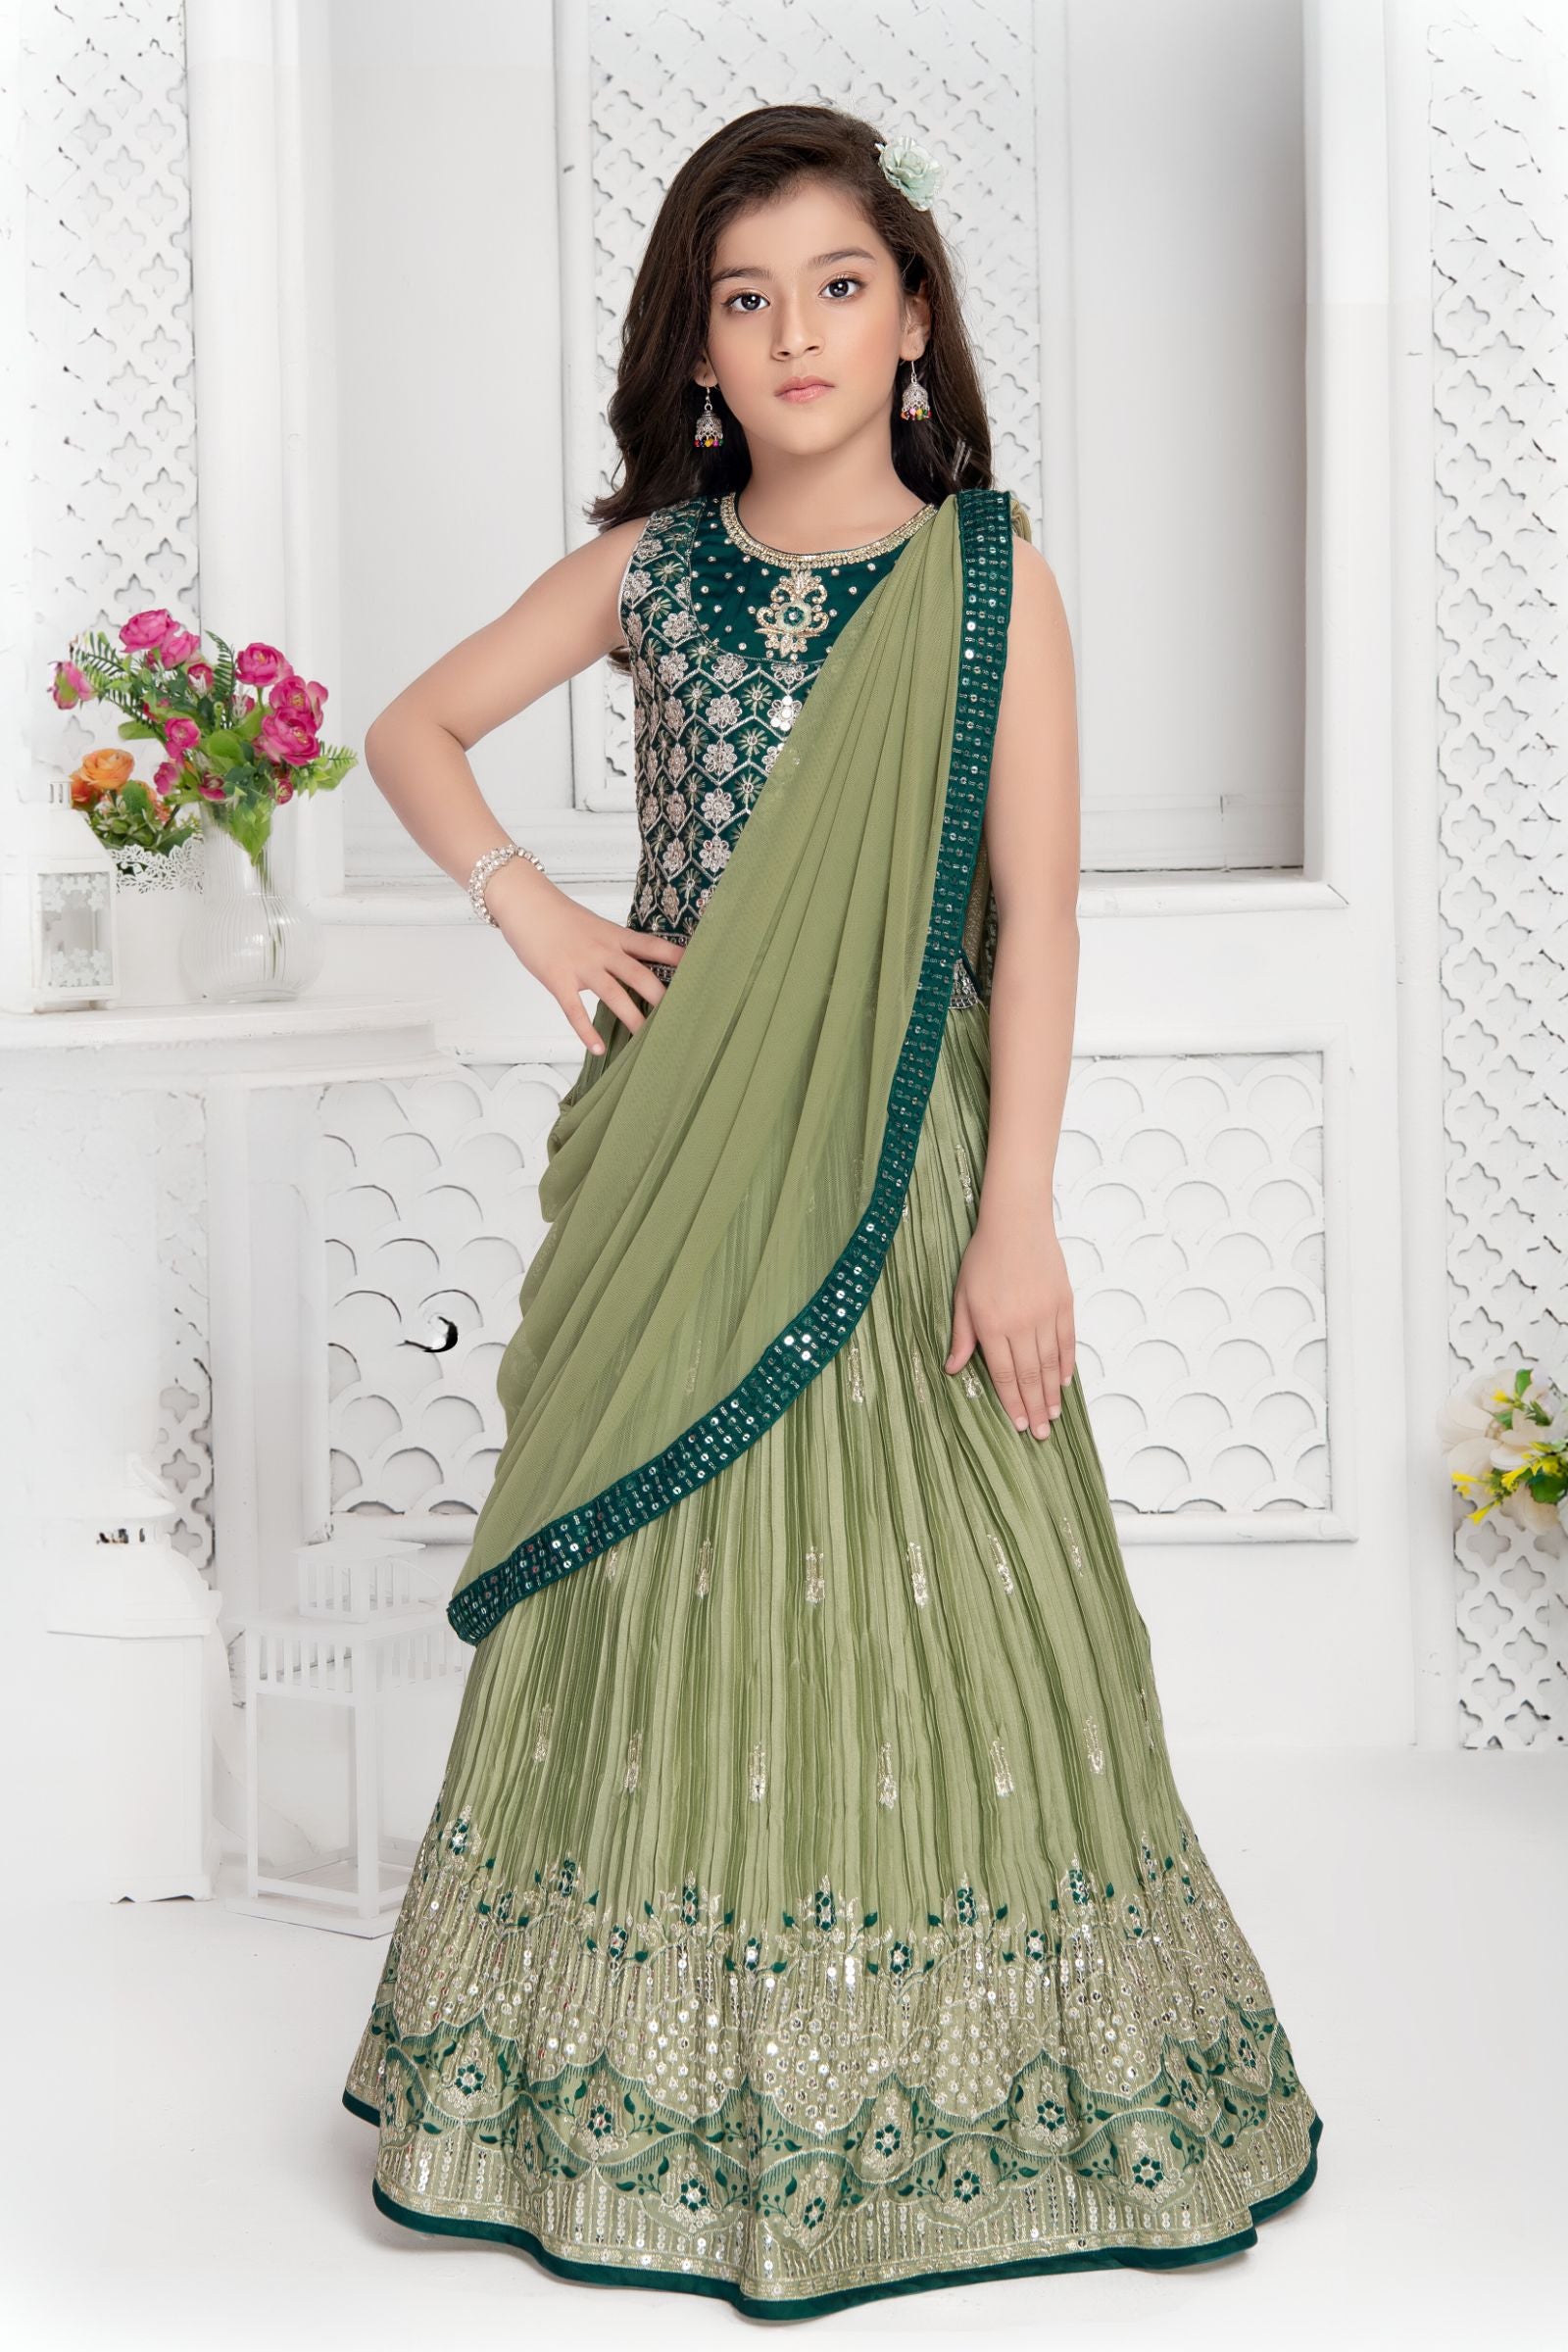 Cancan Party and Wedding Wear Kids Lehenga With Embroidered Top, Age: 7-9  Years at Rs 3599/piece in Raipur